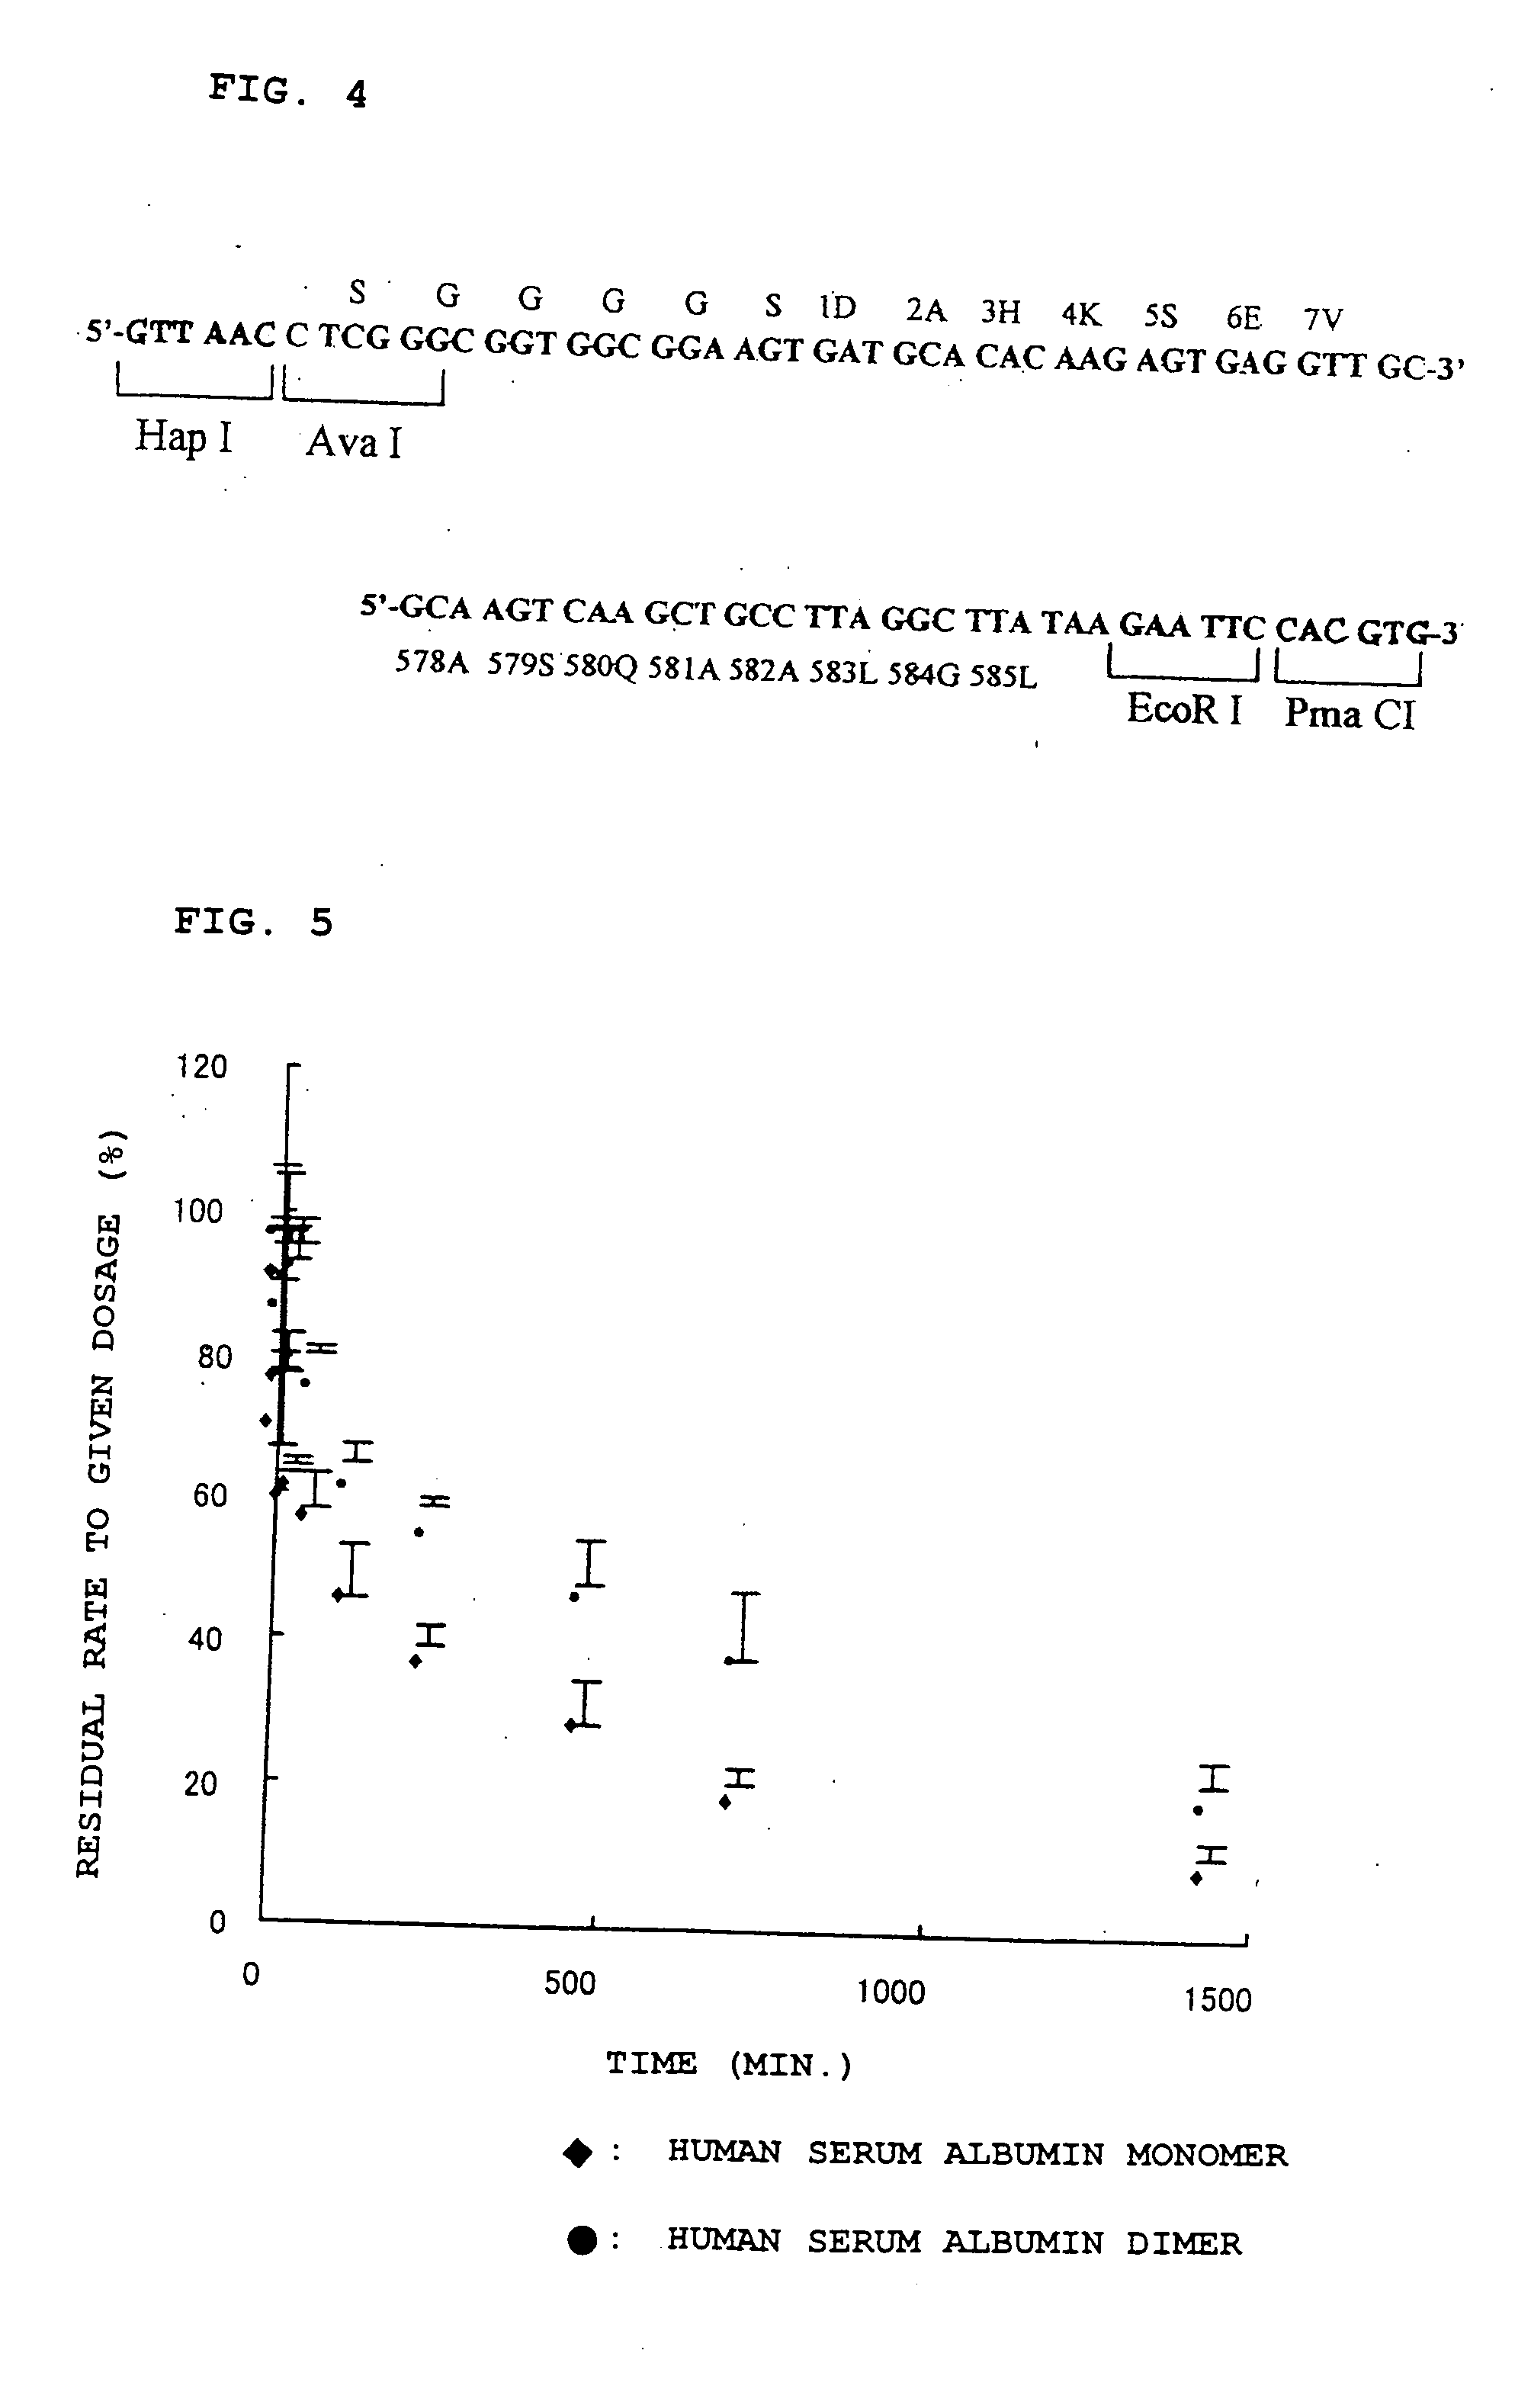 Recombinant protein containing serum albumin multimer